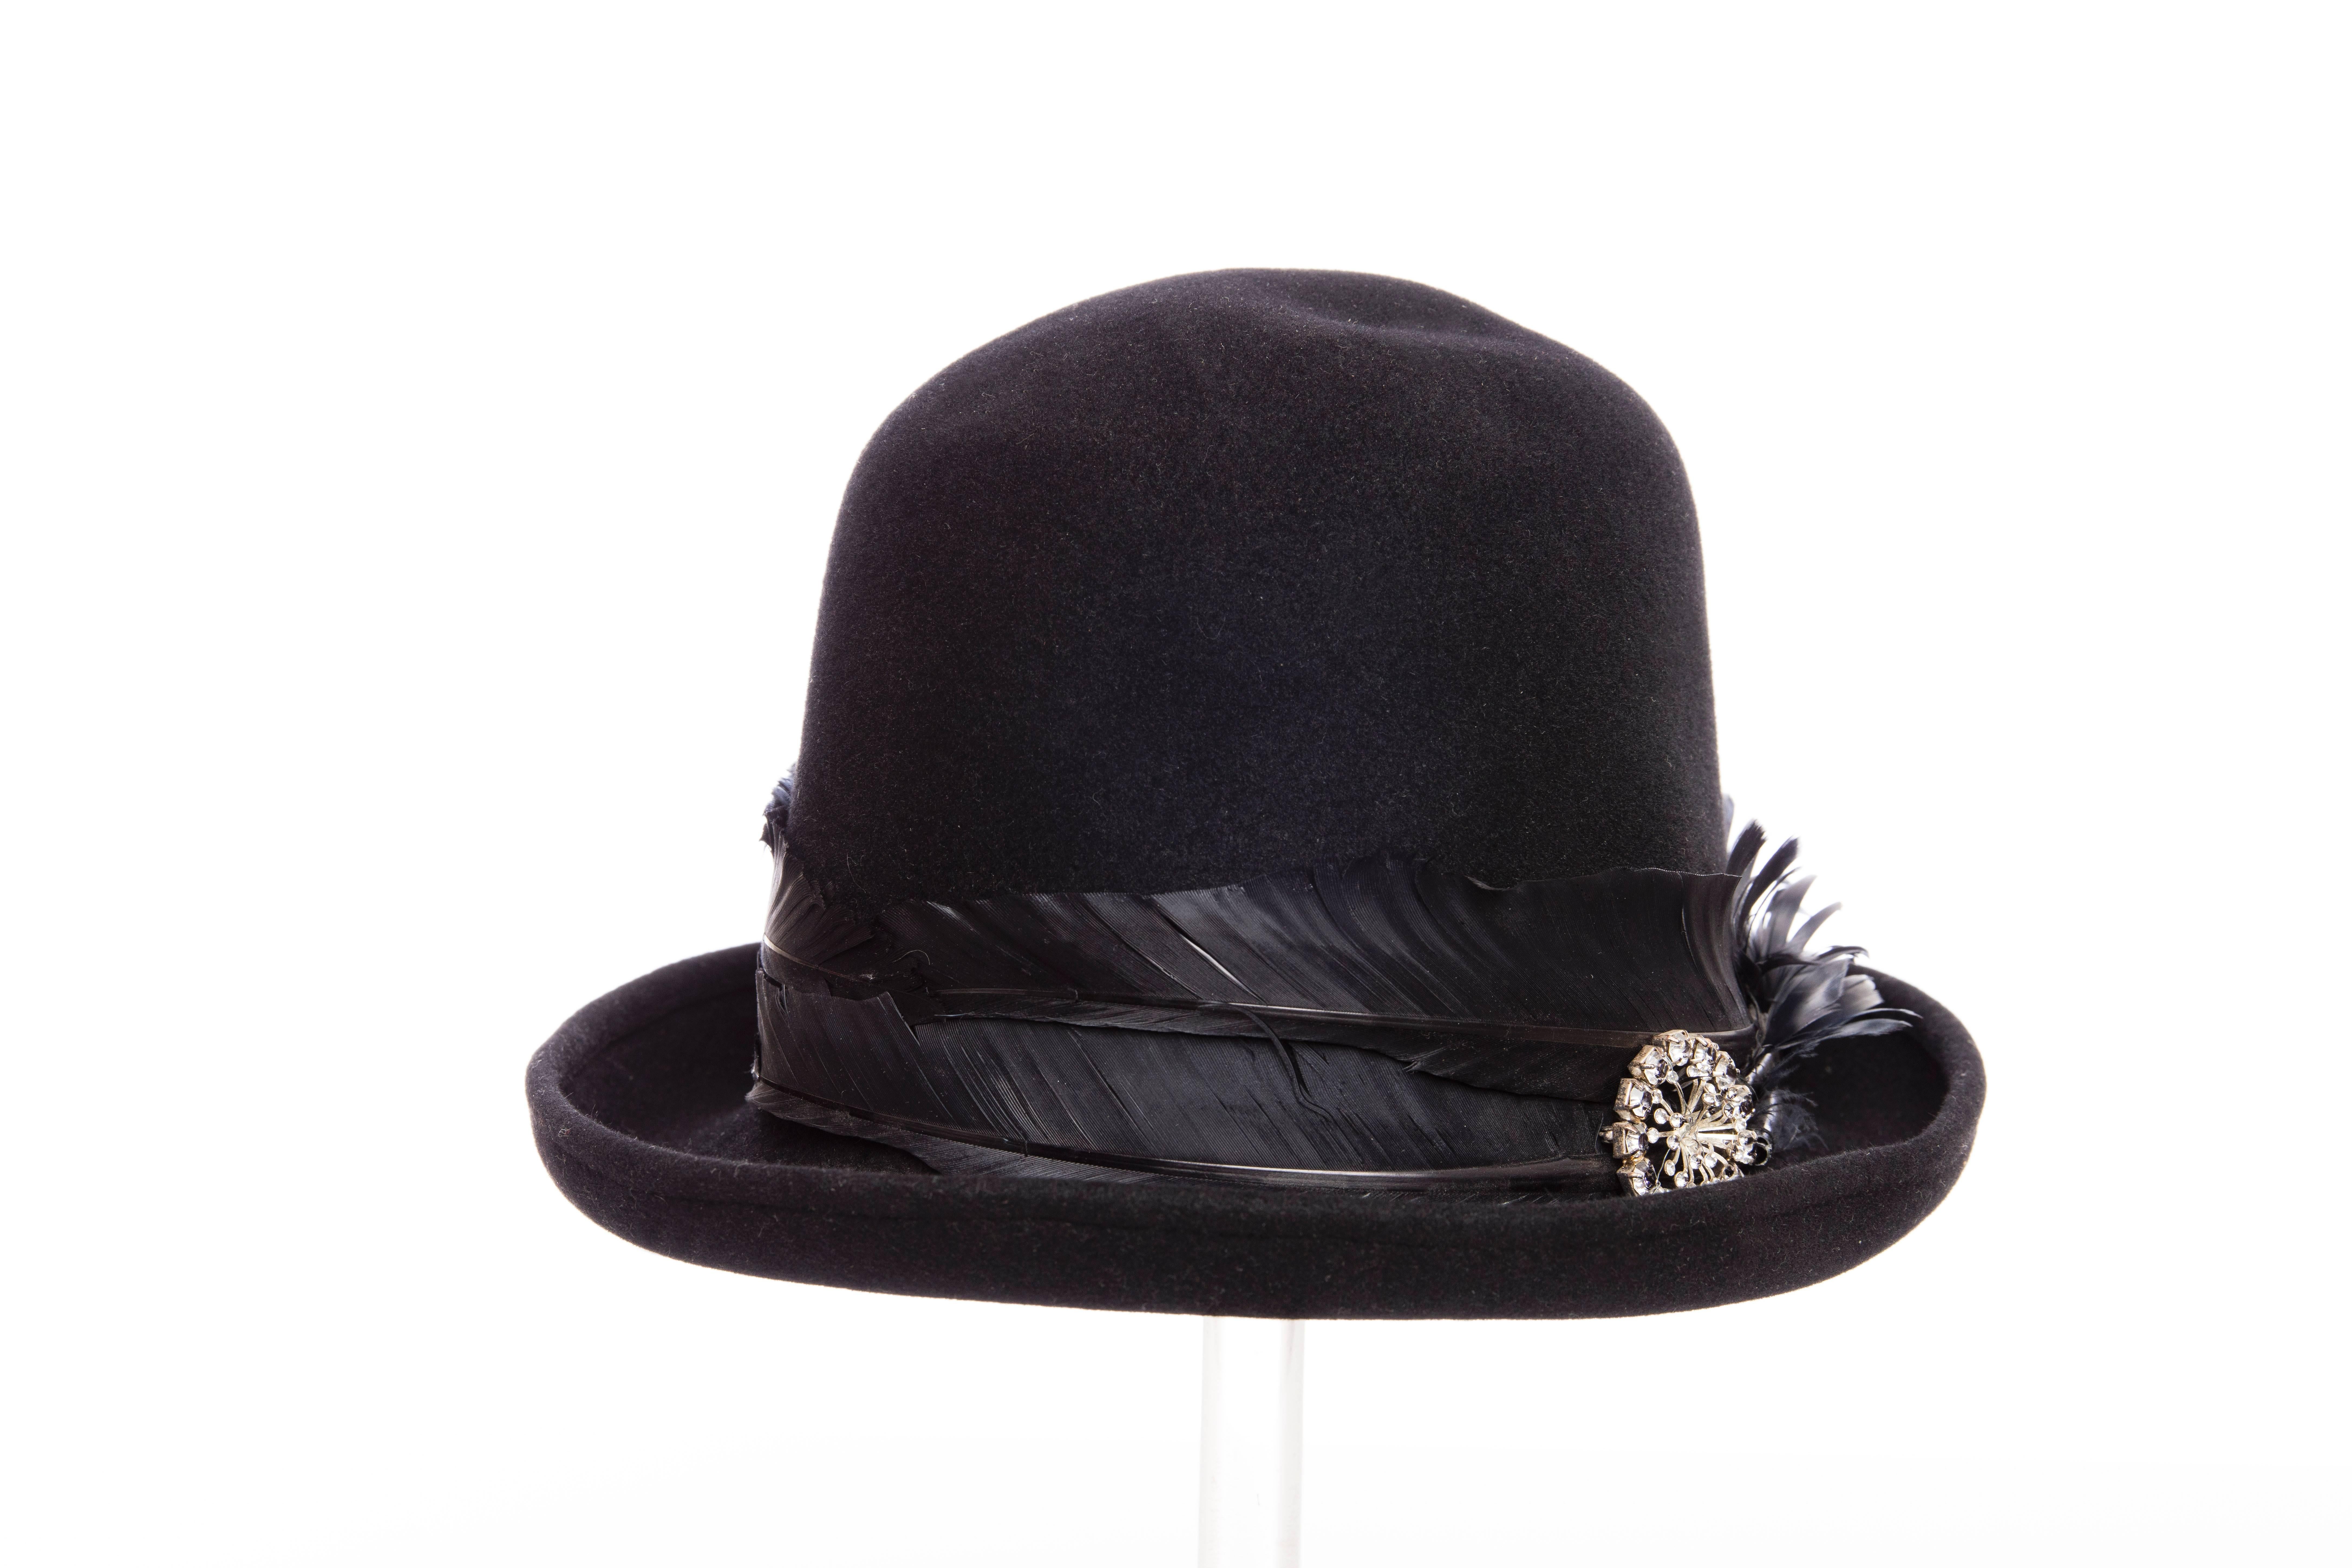  Comme Des Garçons Homme Plus by Stephen Jones men's black wool hat with feather and jewel embellished at exterior.

Circumference 22 -  Brim 2.5